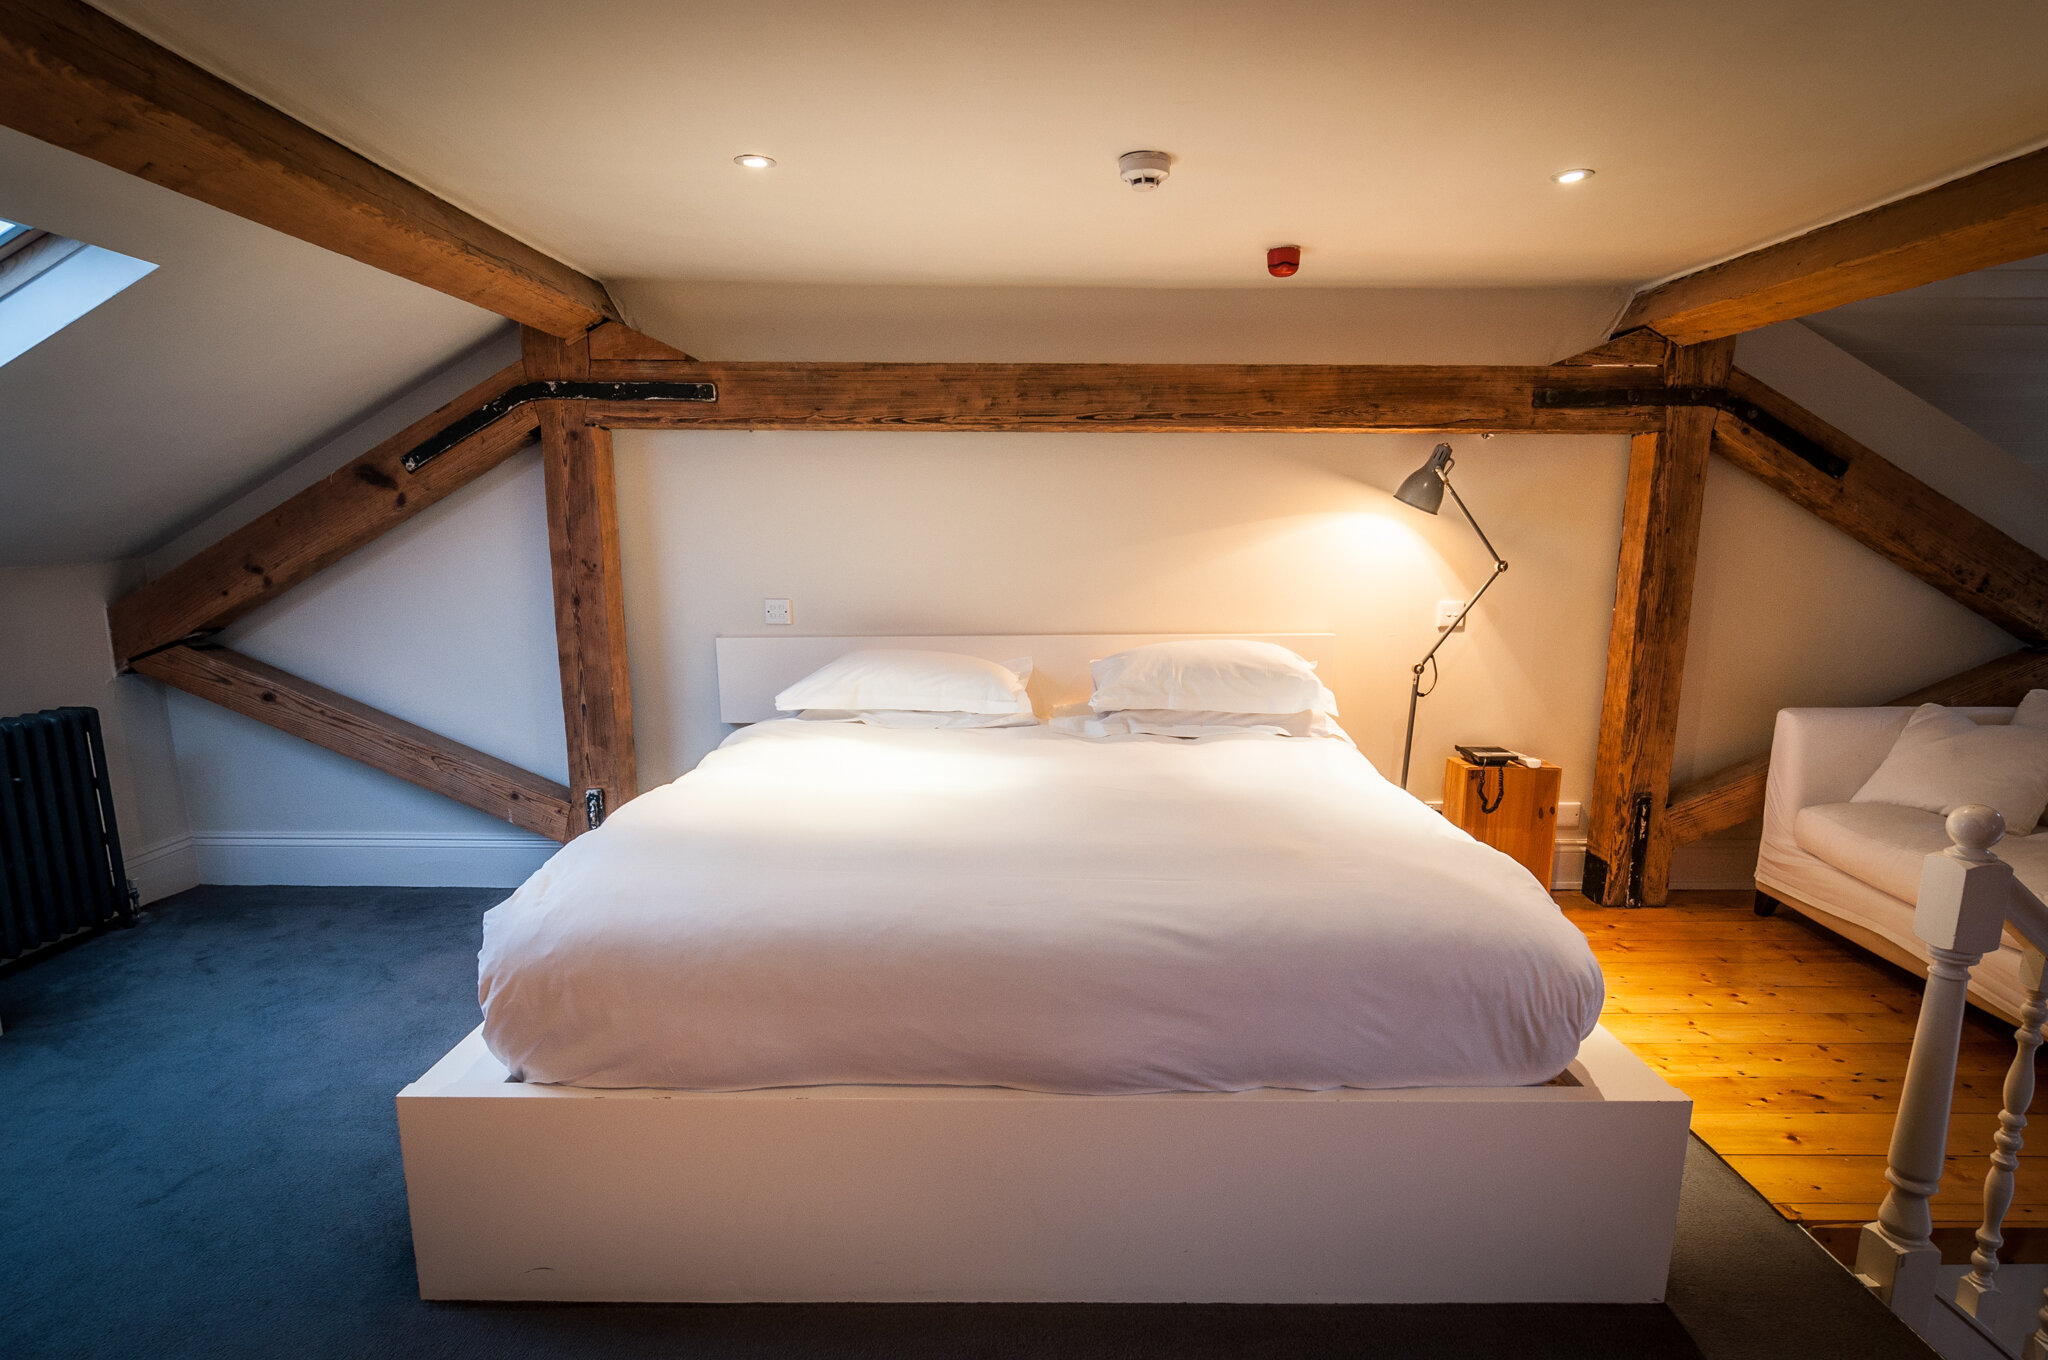 Kelly’s Hotel is one of the top boutique hotels in Dublin showing room with old wood beams